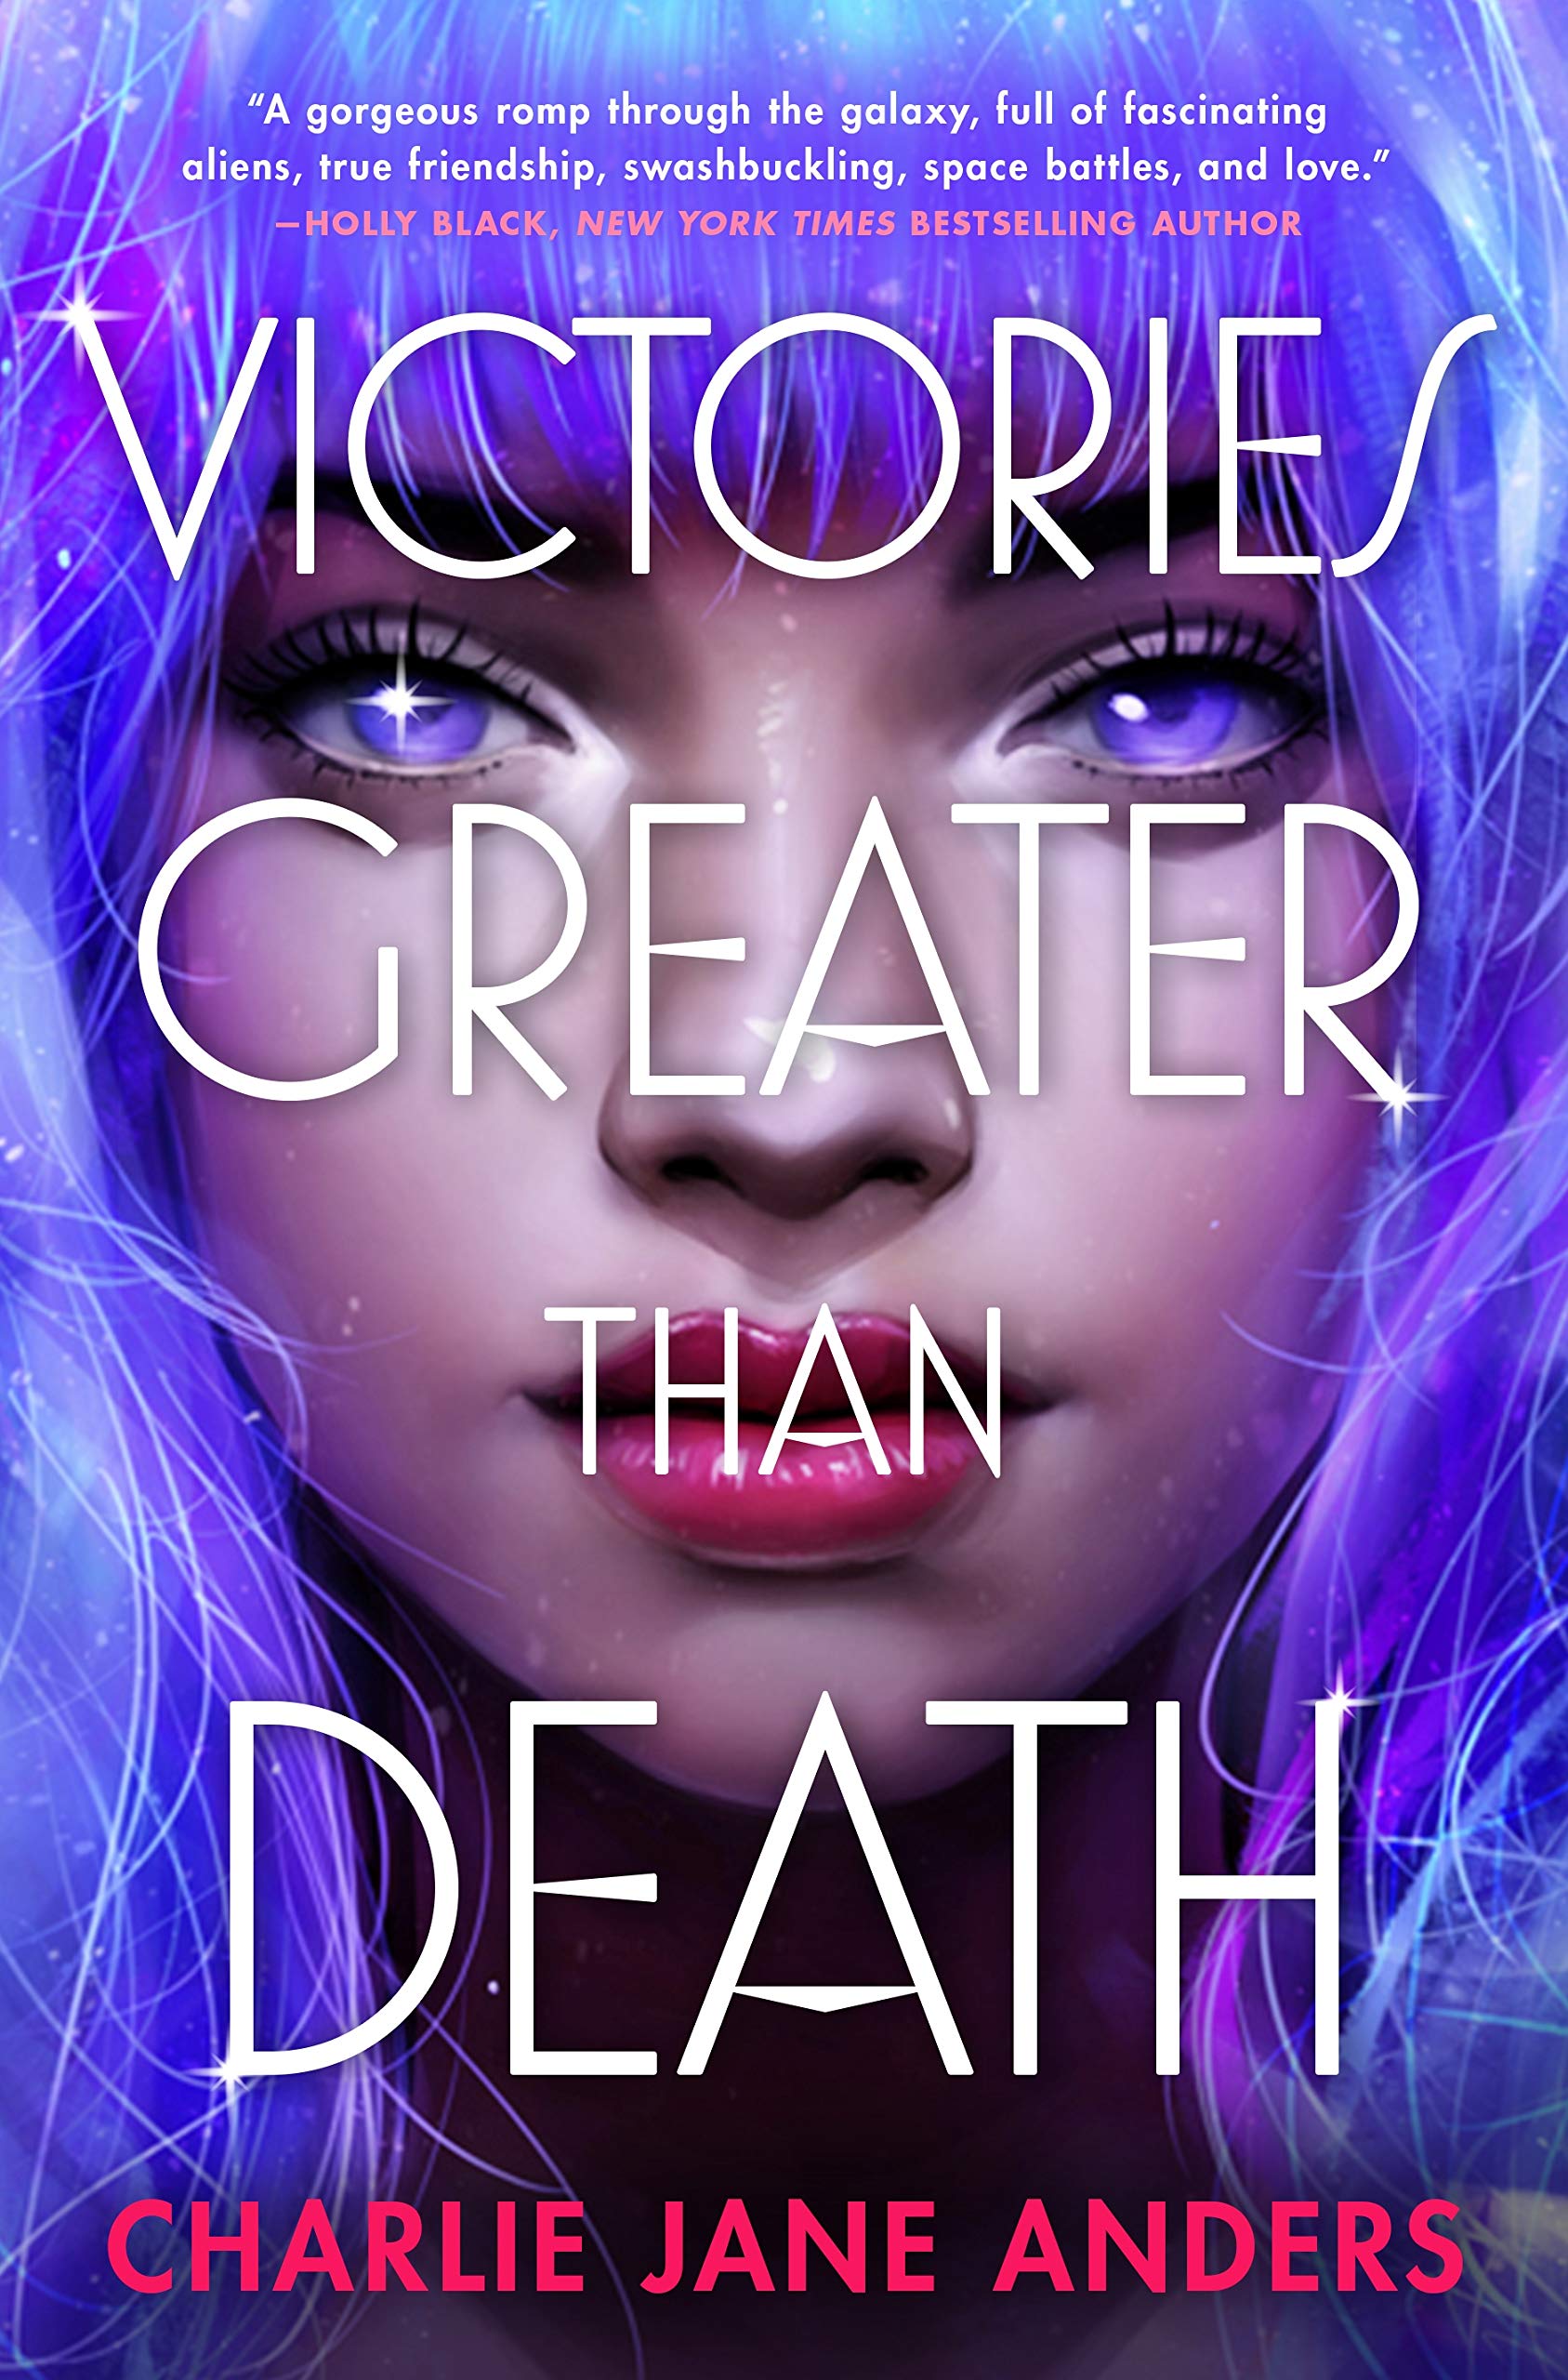 Cover of "Victories Greater Than Death" by Charlie Jane Anders